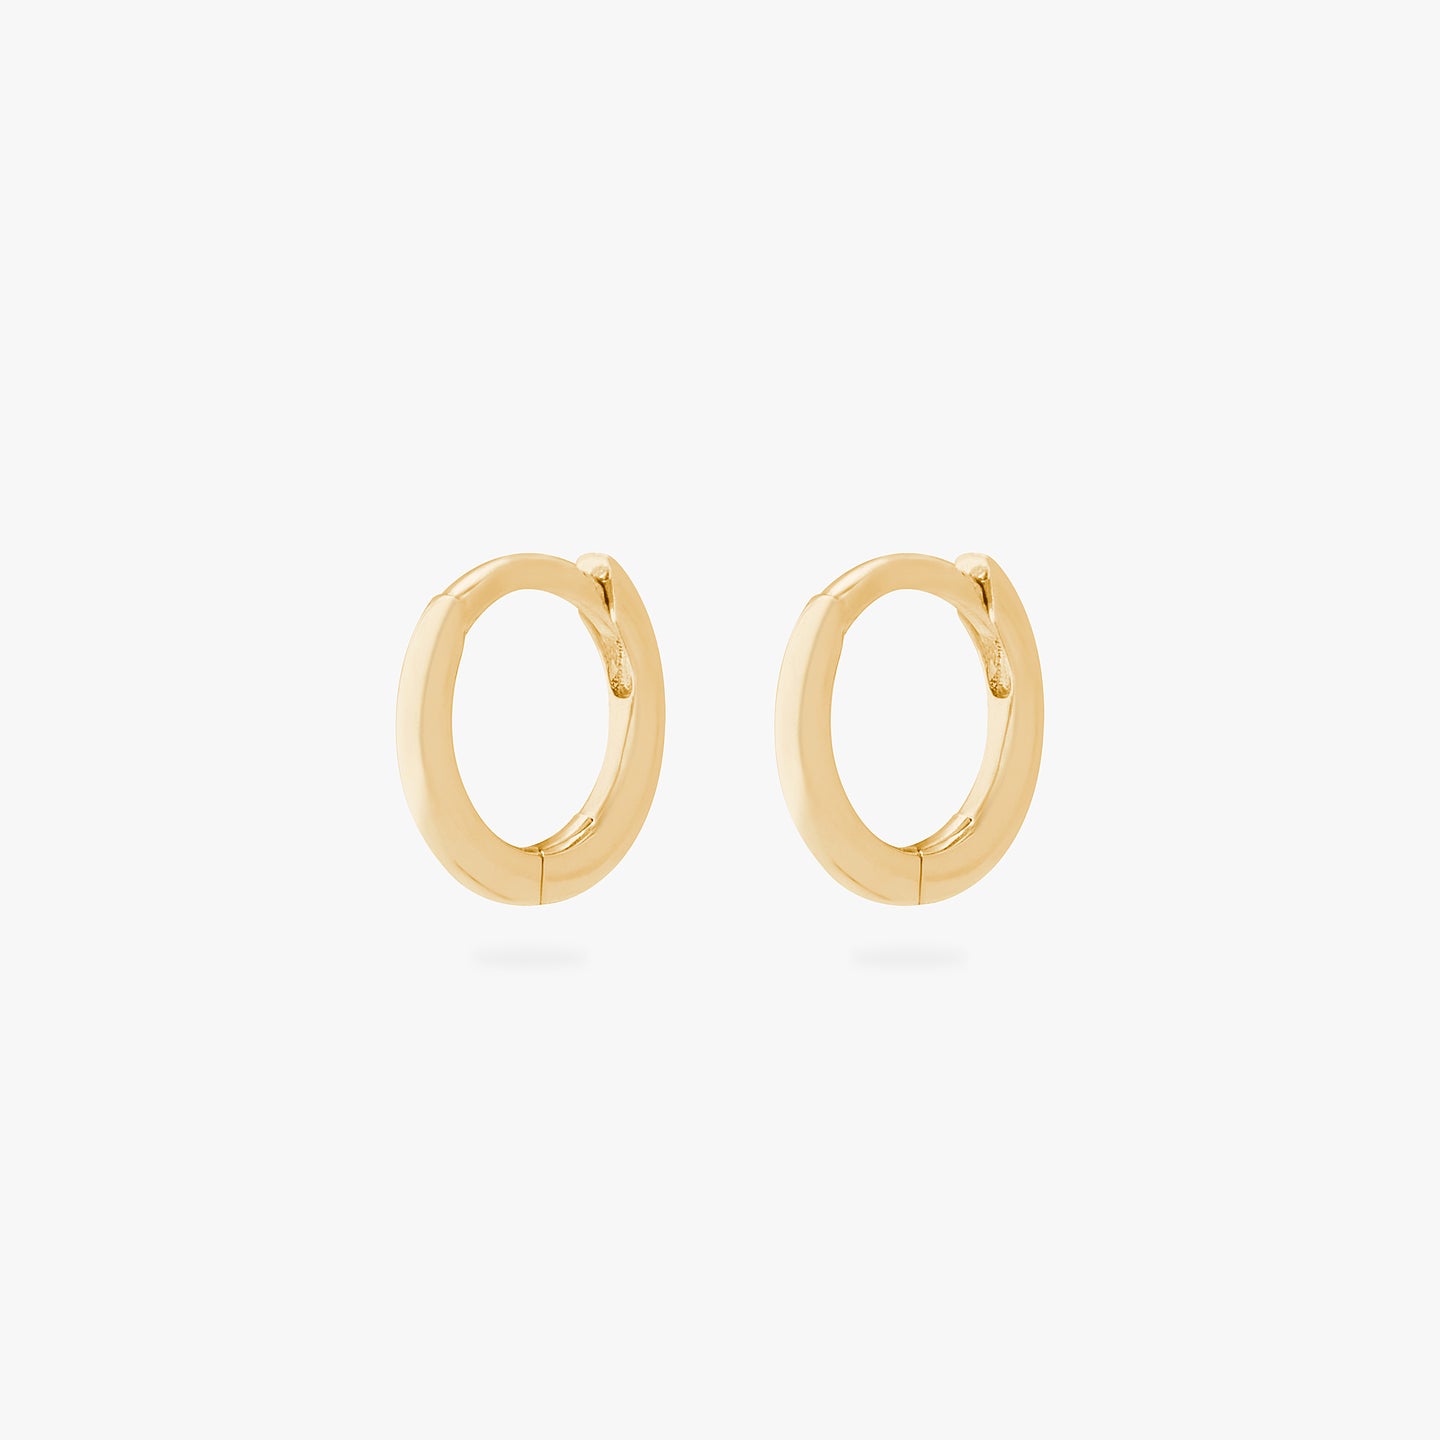 An image of a pair of micro-sized gold huggies (6mm inner diameter). [pair] color:null|gold